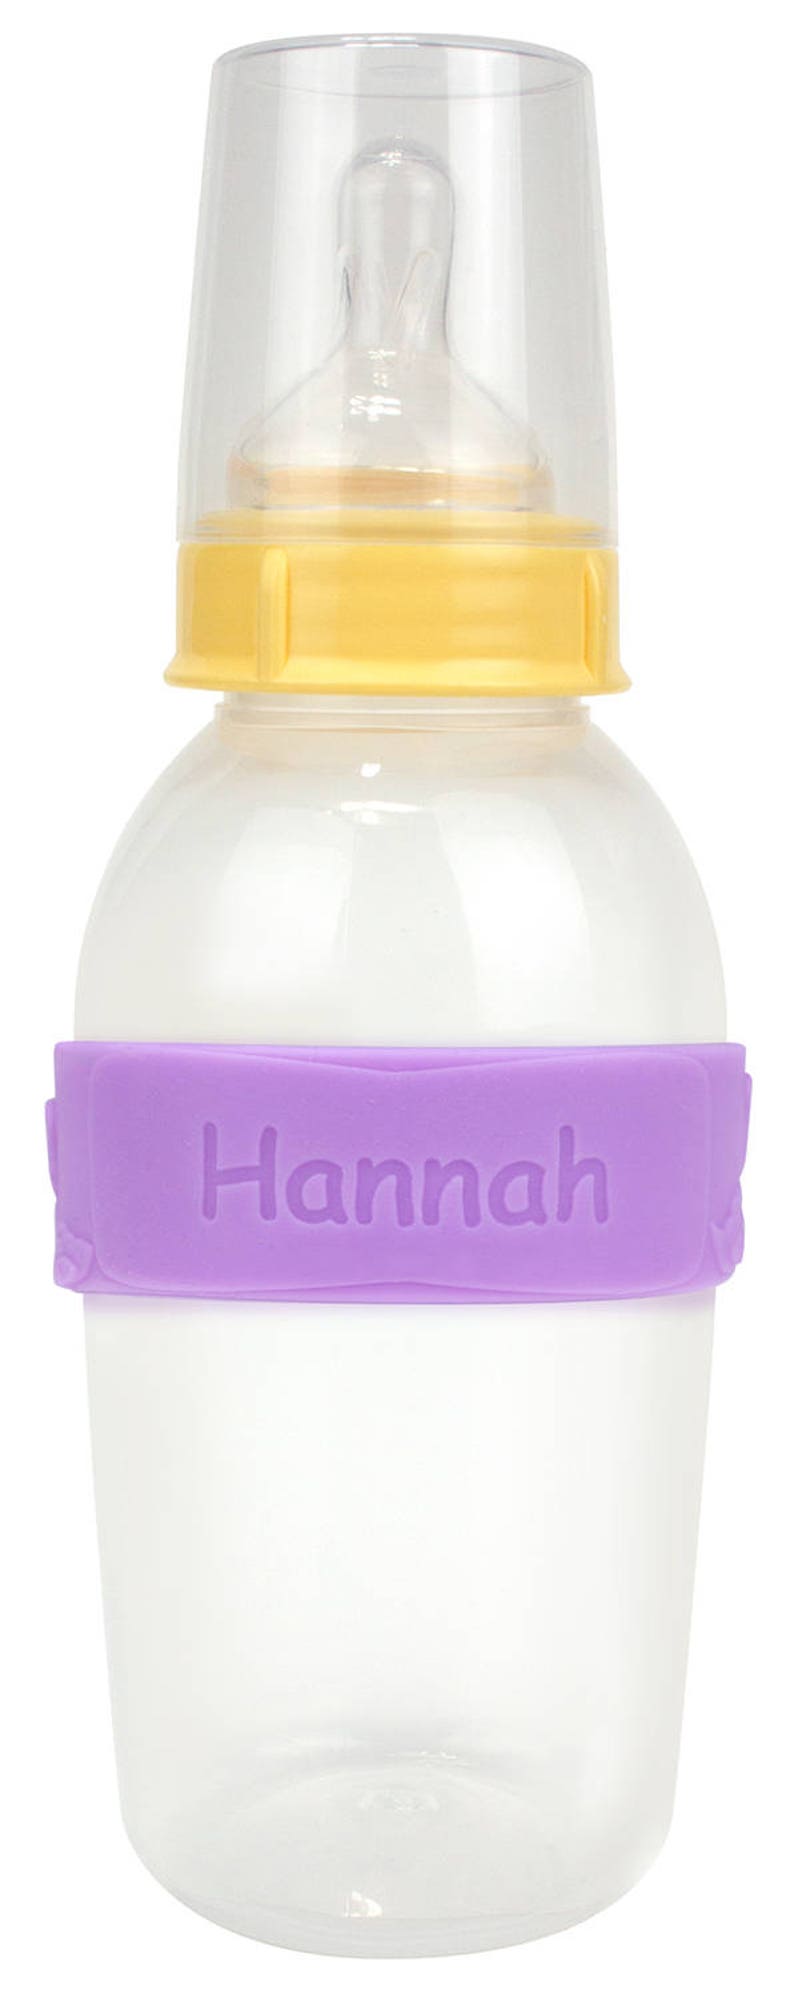 PACK of 2 Personalized Daycare Labels / Baby Bottle Labels / Sippy Cup Labels / Silicone Name Bands image 7